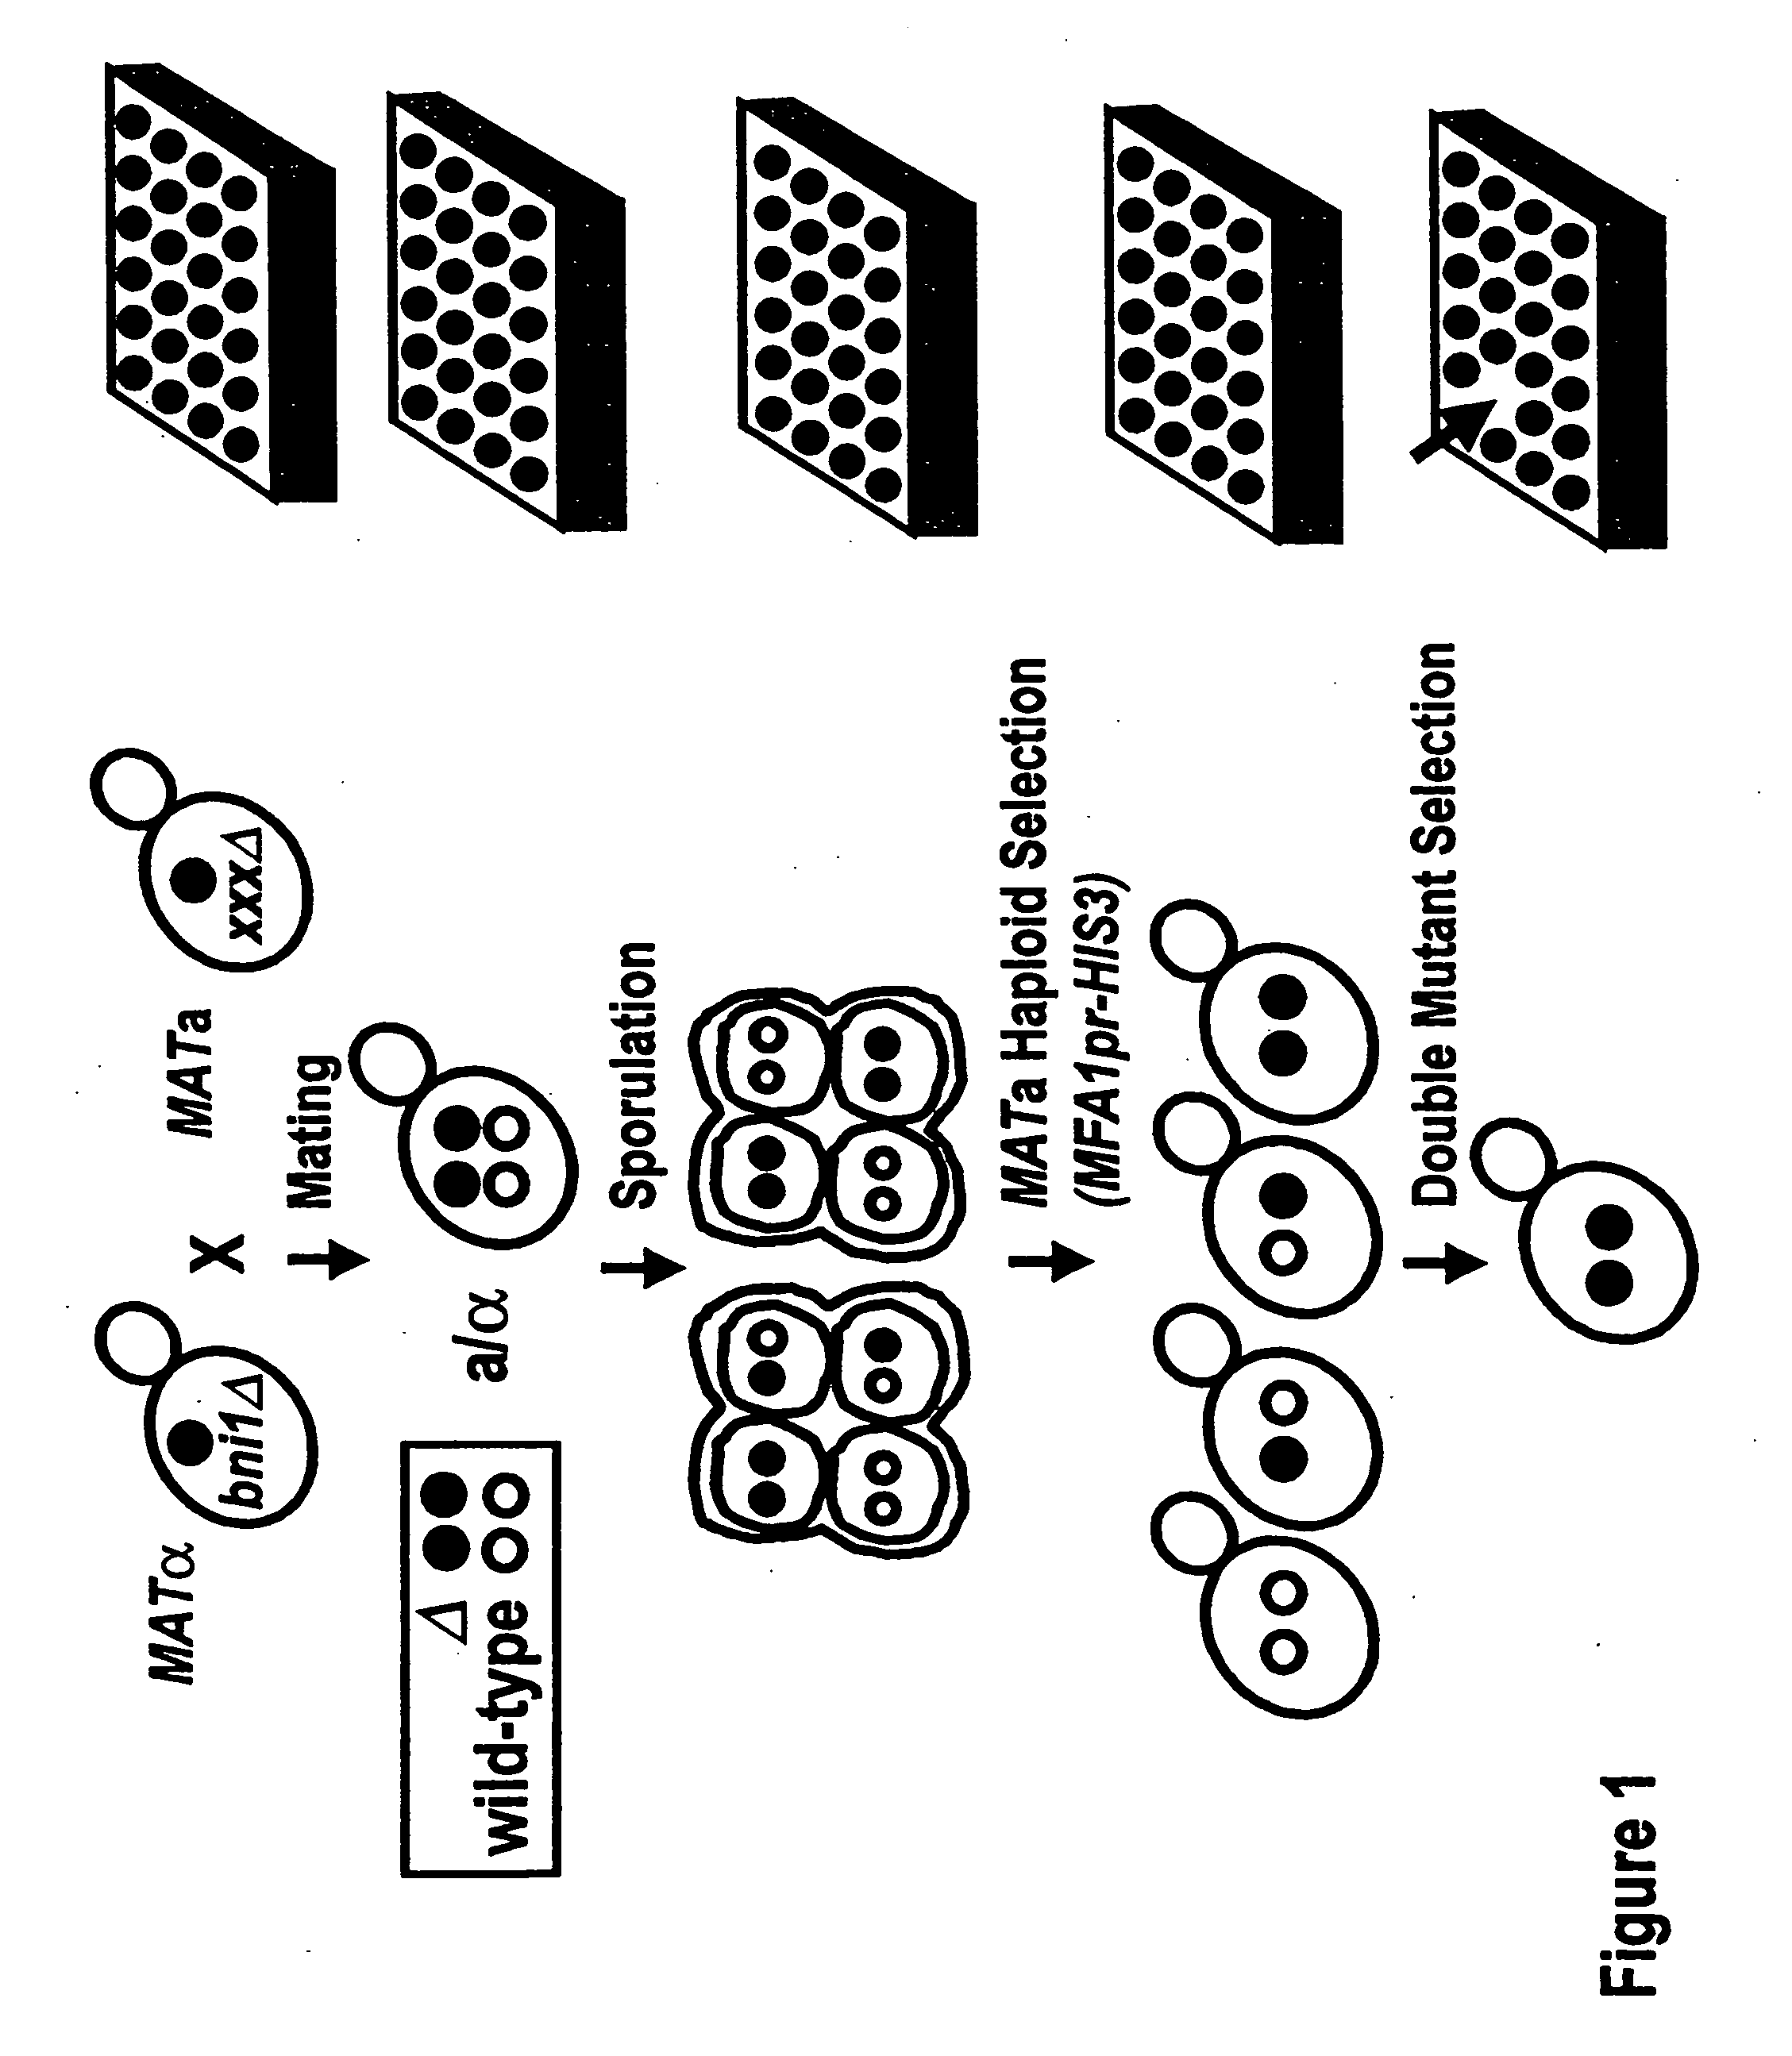 Yeast arrays, methods of making such arrays, and methods of analyzing such arrays